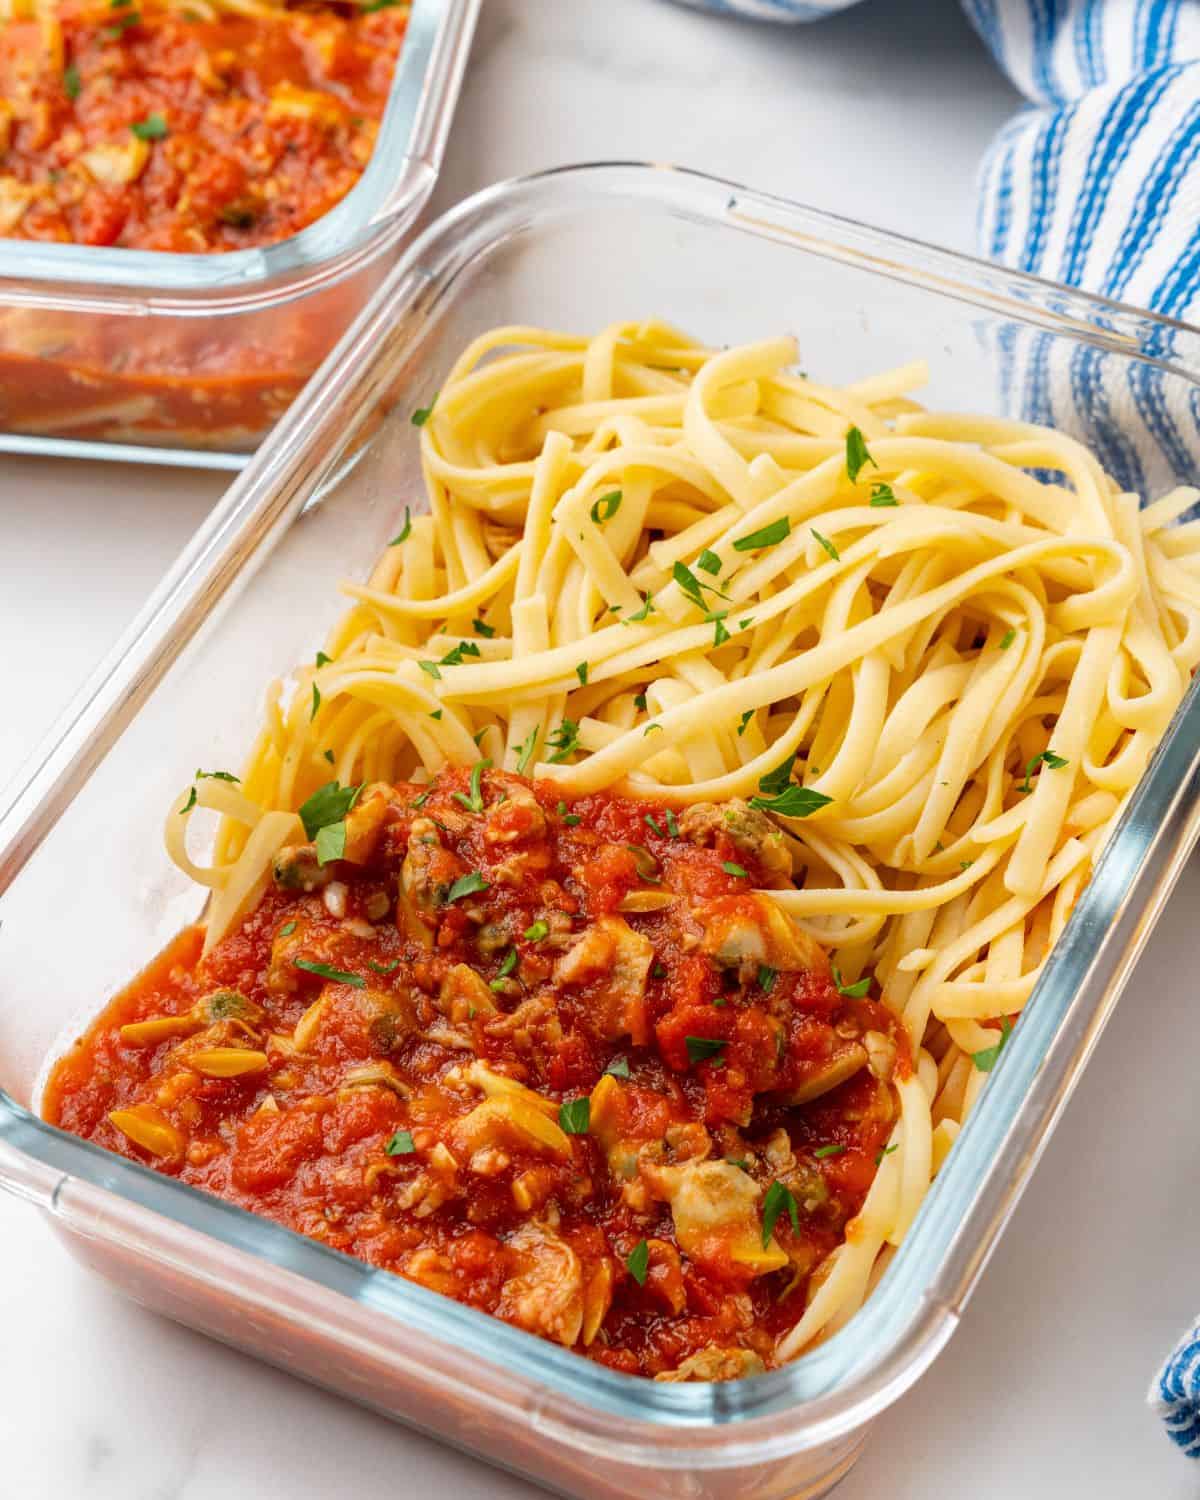 https://www.organizeyourselfskinny.com/wp-content/uploads/2023/03/linguine-clam-sauce-in-a-meal-prep-container-2.jpg